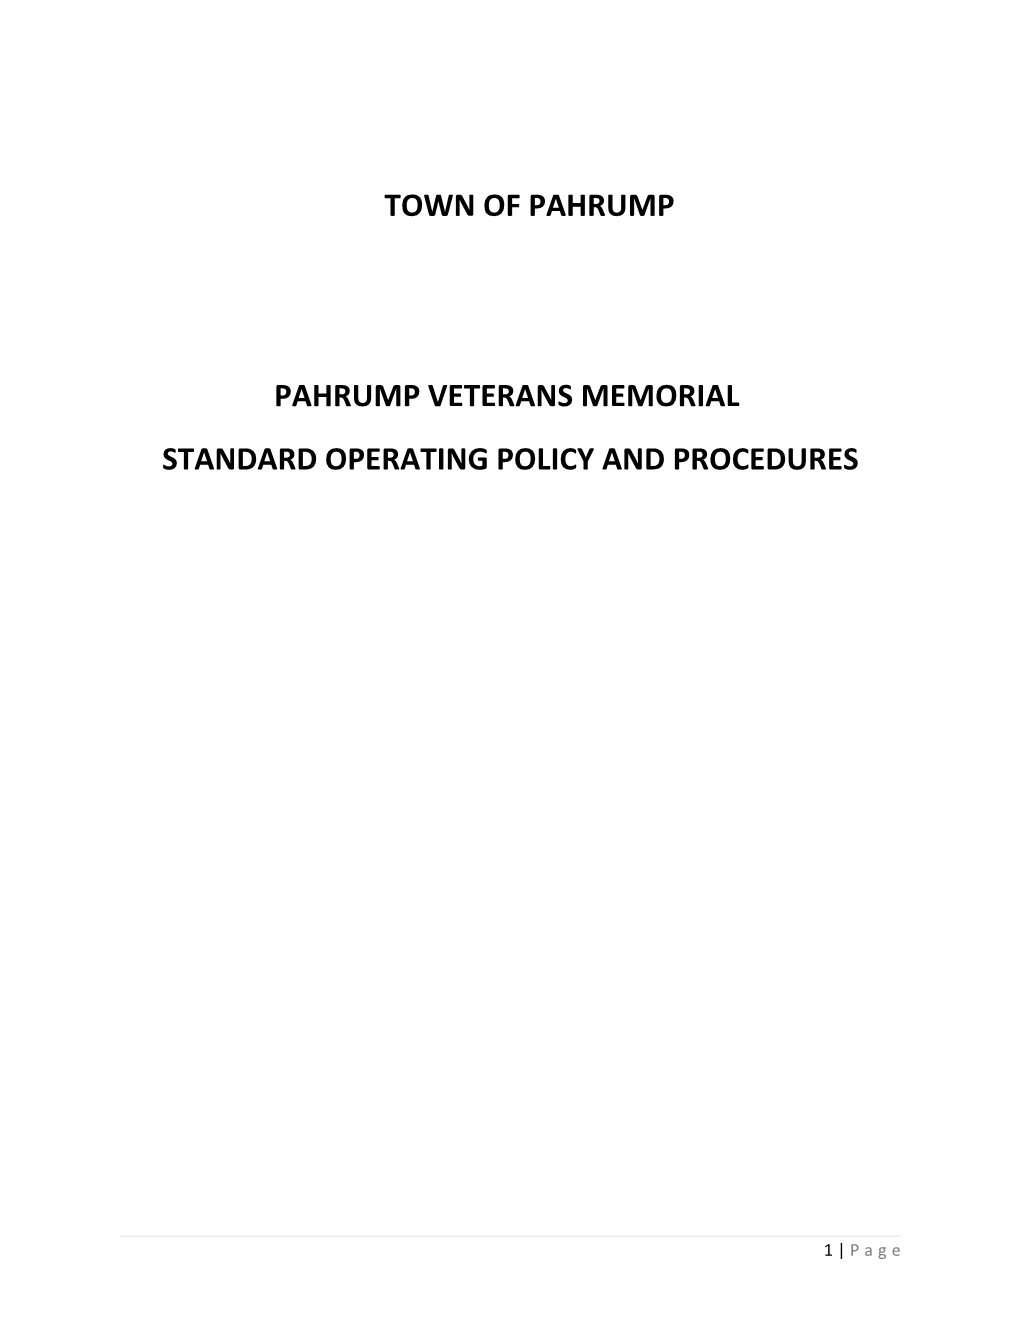 Standard Operating Policy and Procedures